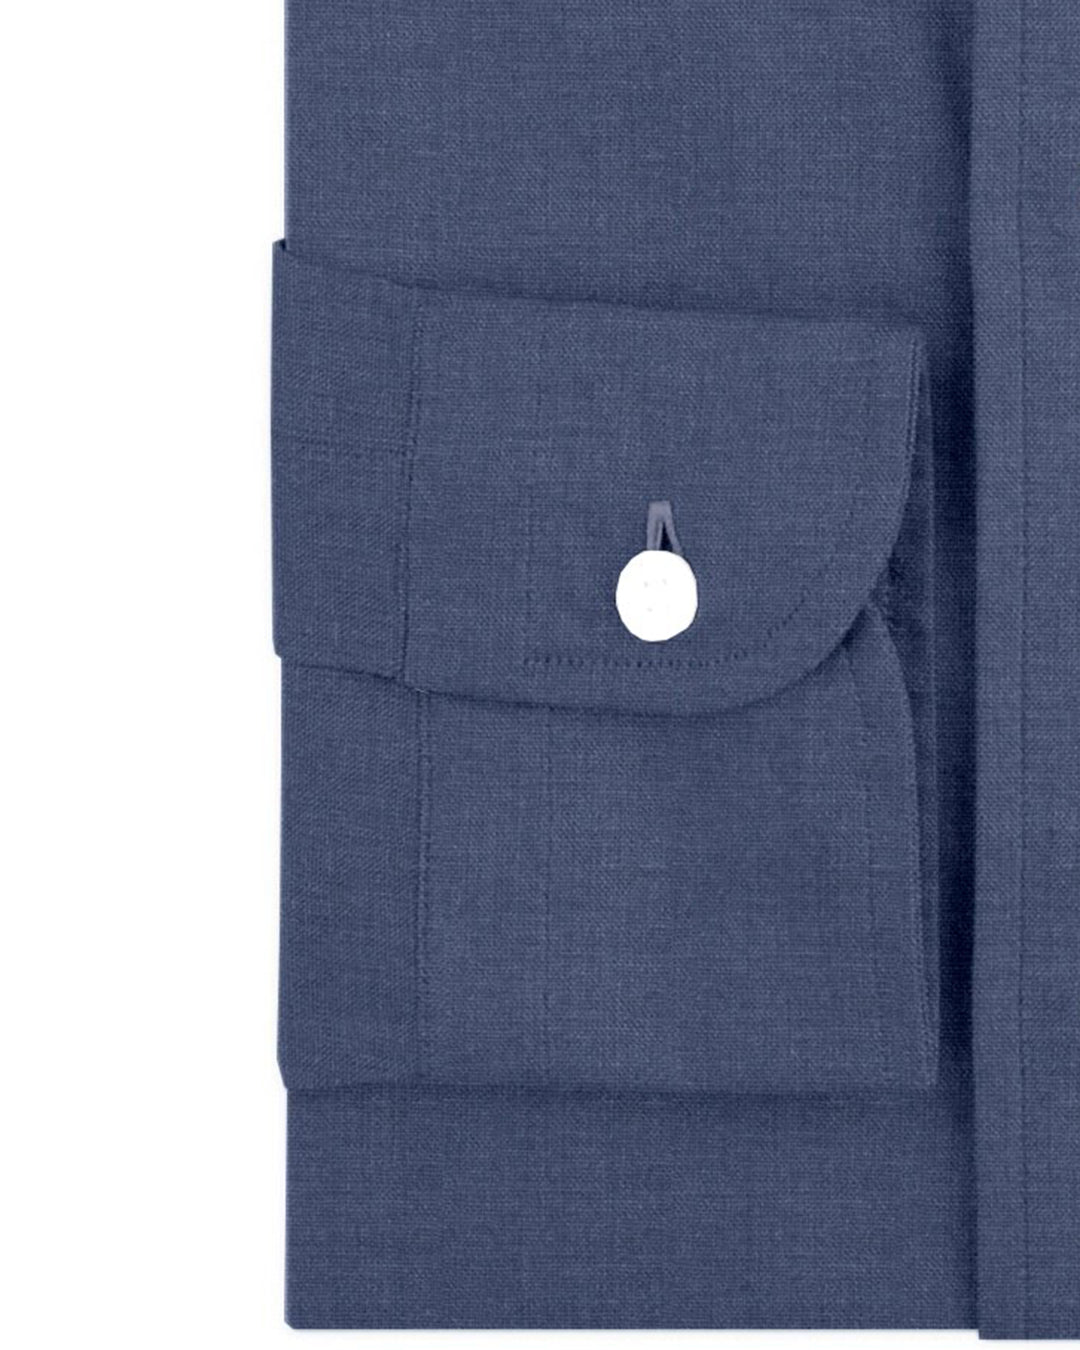 Cuff of the custom linen shirt for men in indigo denim by Luxire Clothing